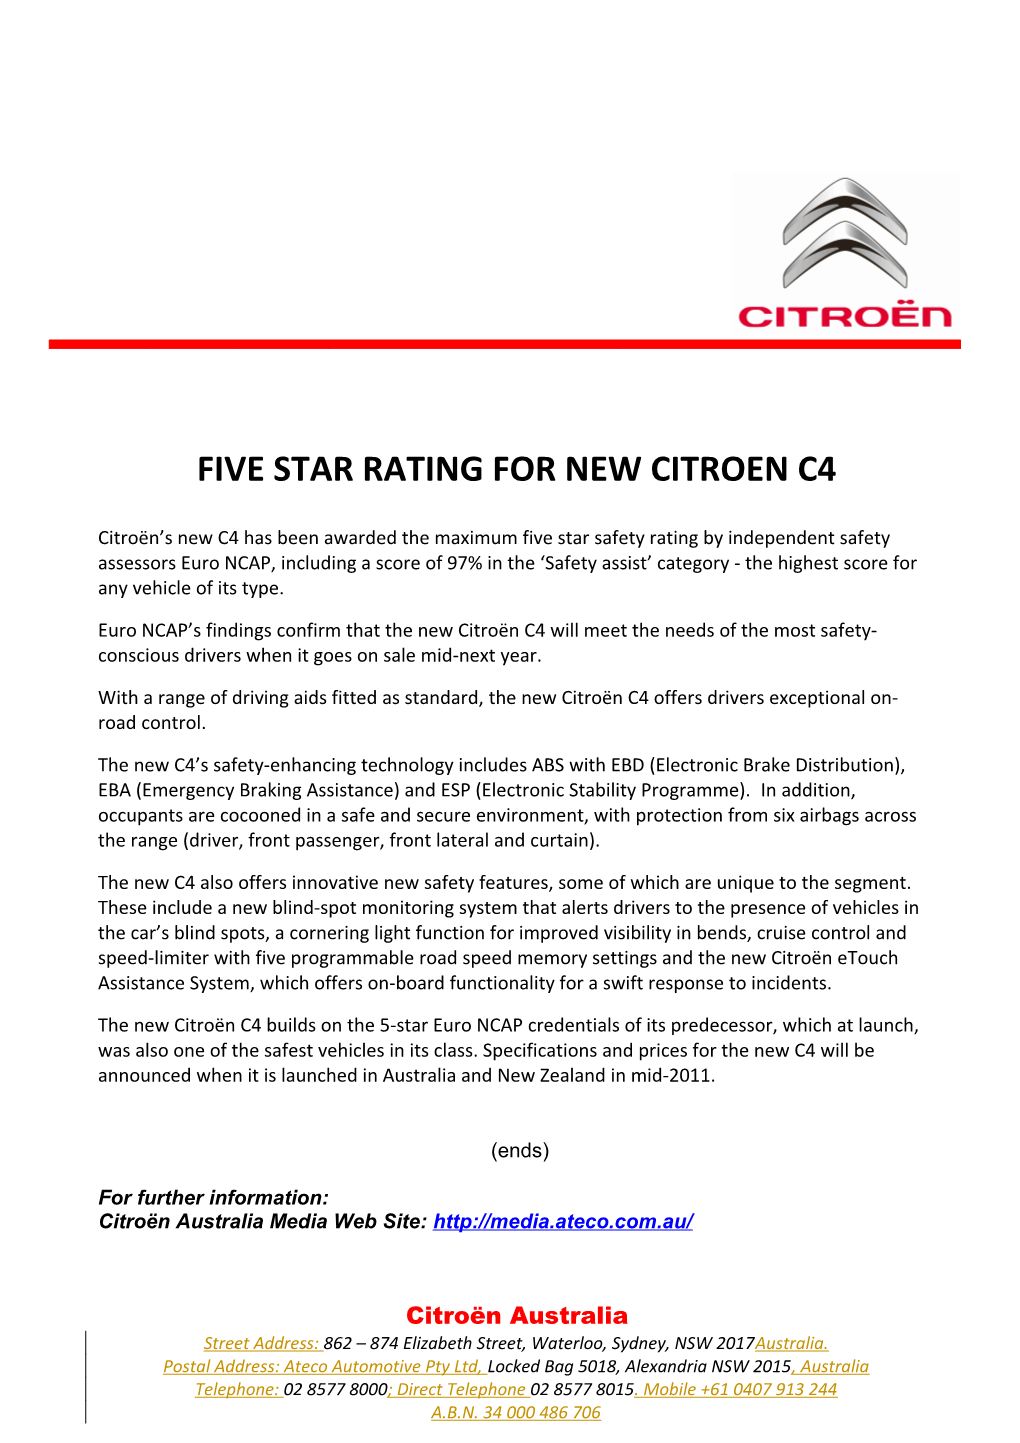 Five Star Rating for New Citroen C4